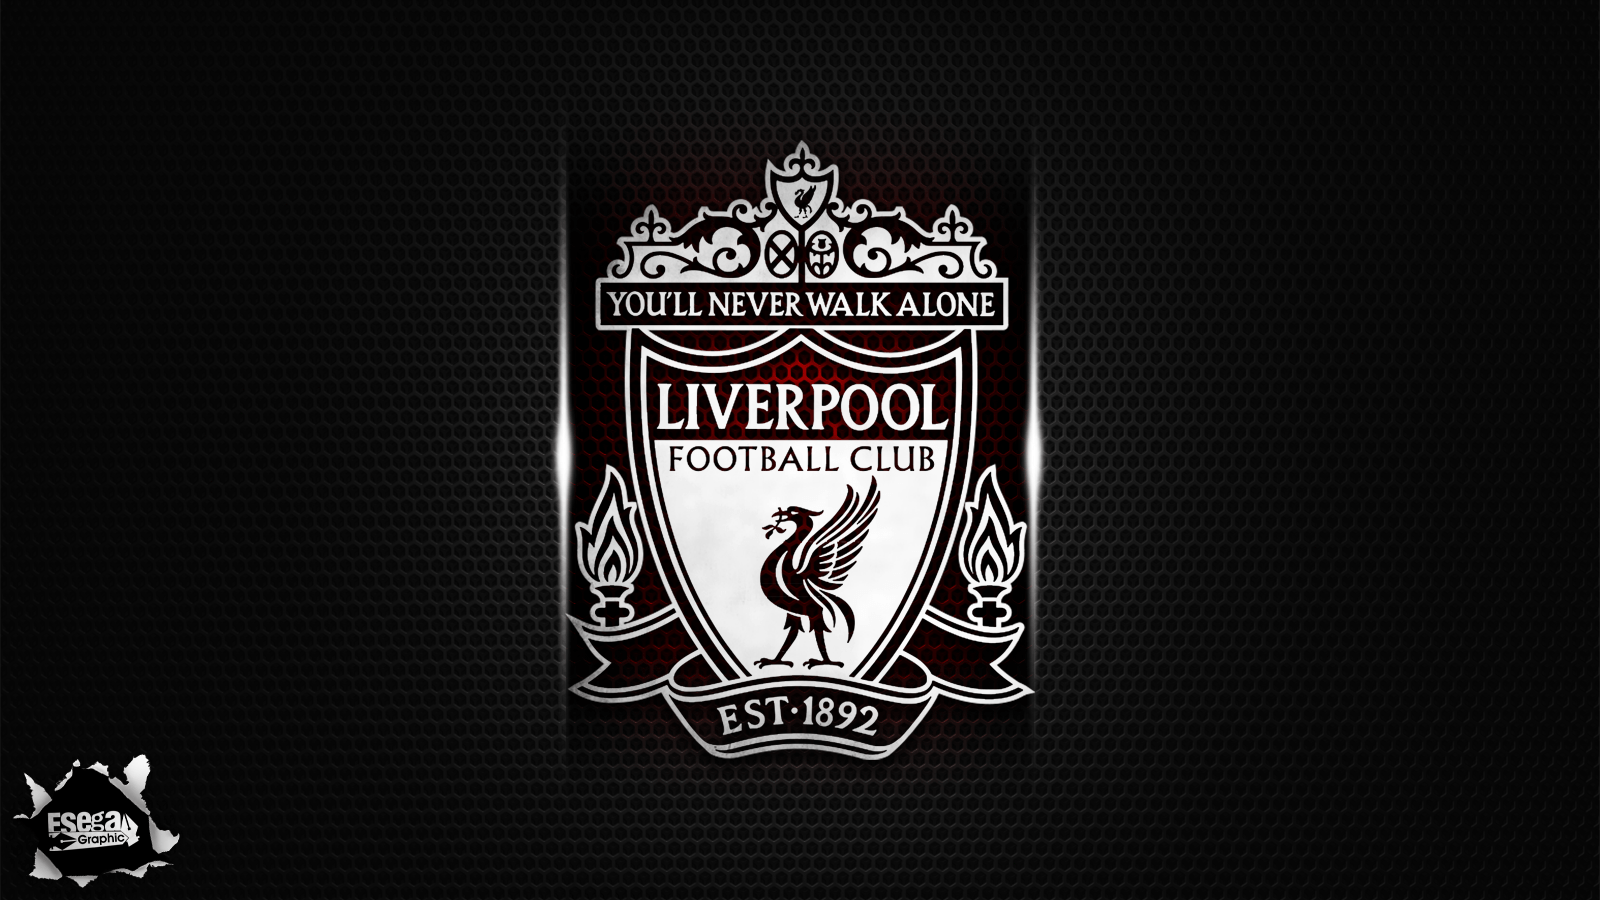 Download Liverpool FC Wallpaper For Mac collection of only